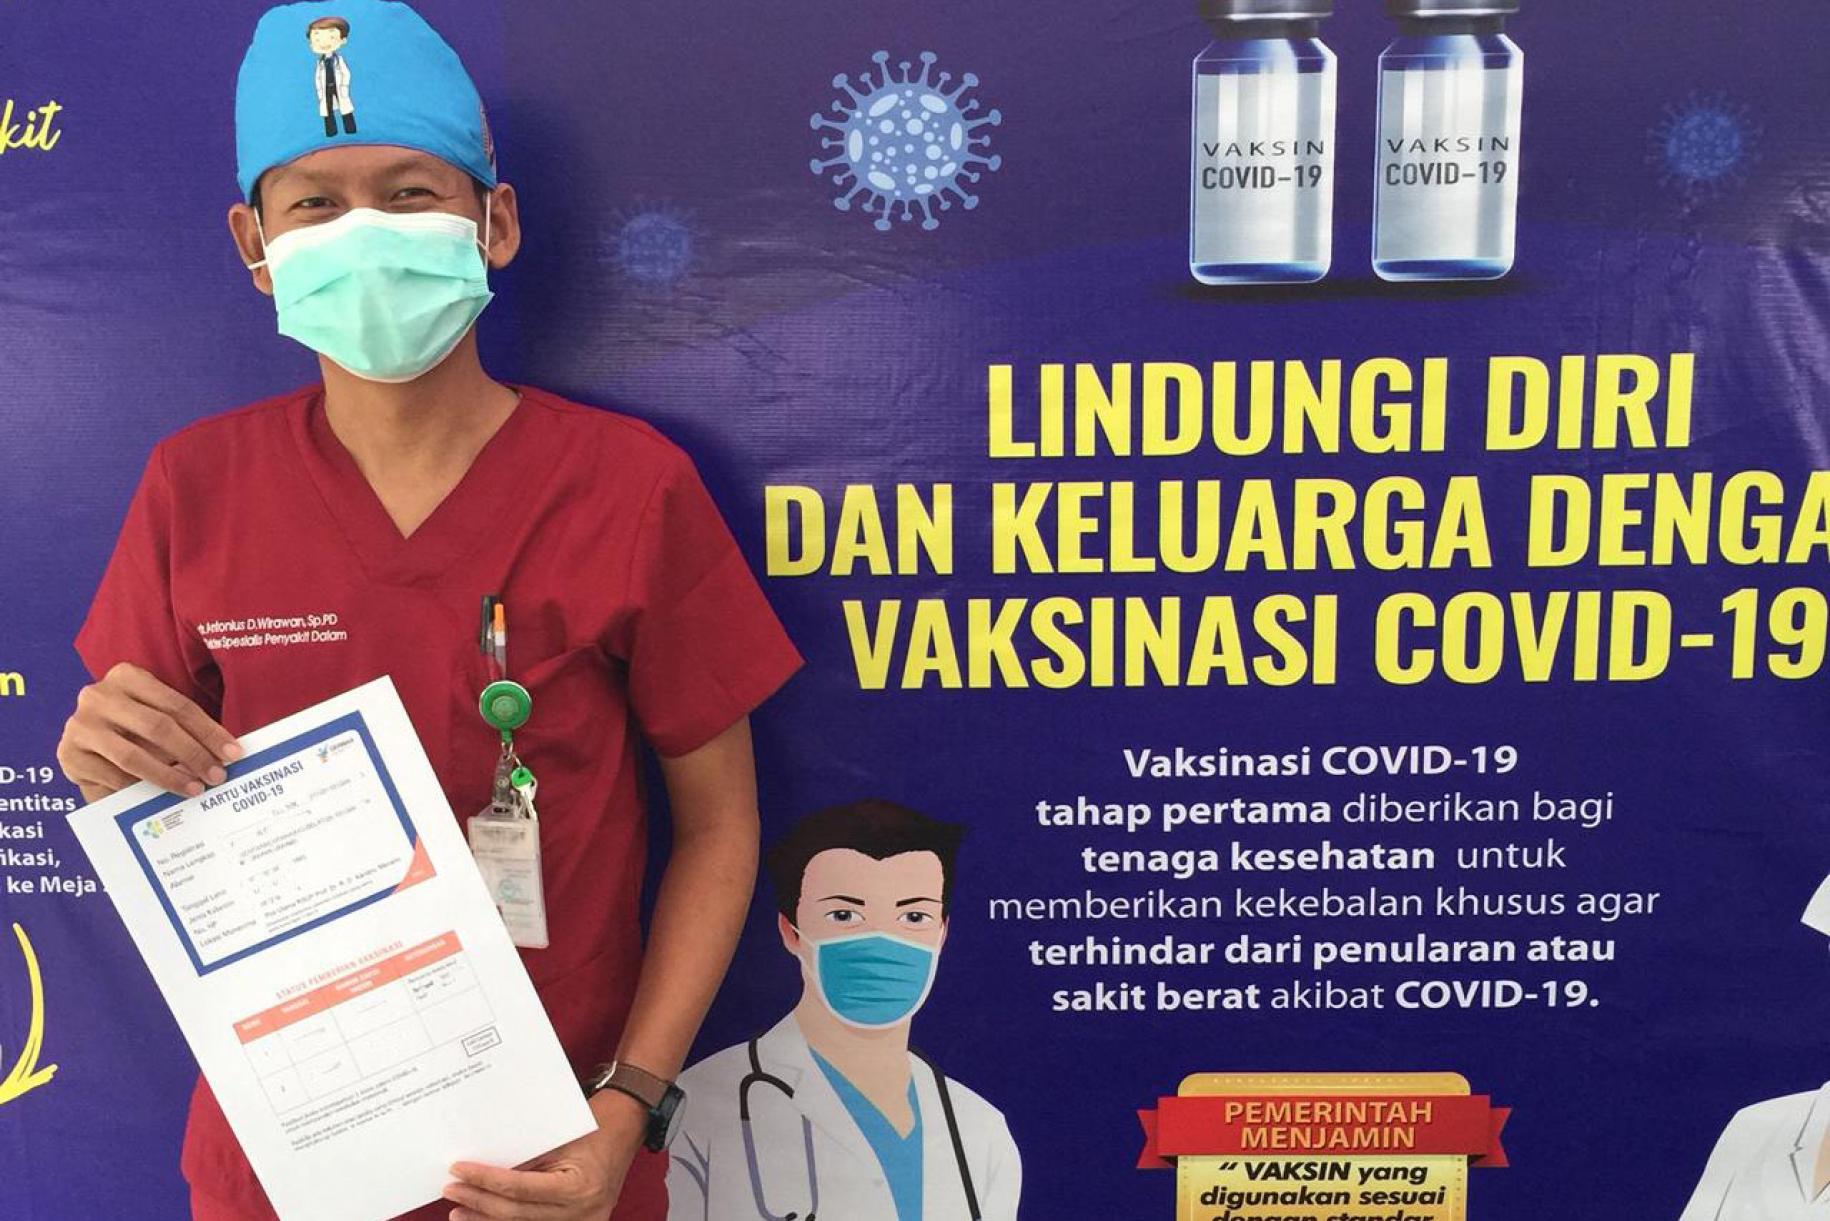 Dr Antonius Irawan stands in front of a COVID-19 vaccination poster holding his COVID-19 vaccination certificate after he received his first dose of COVID-19 vaccine at Dr Kandou District General Hospital .in Manado City, North Sulawesi Province